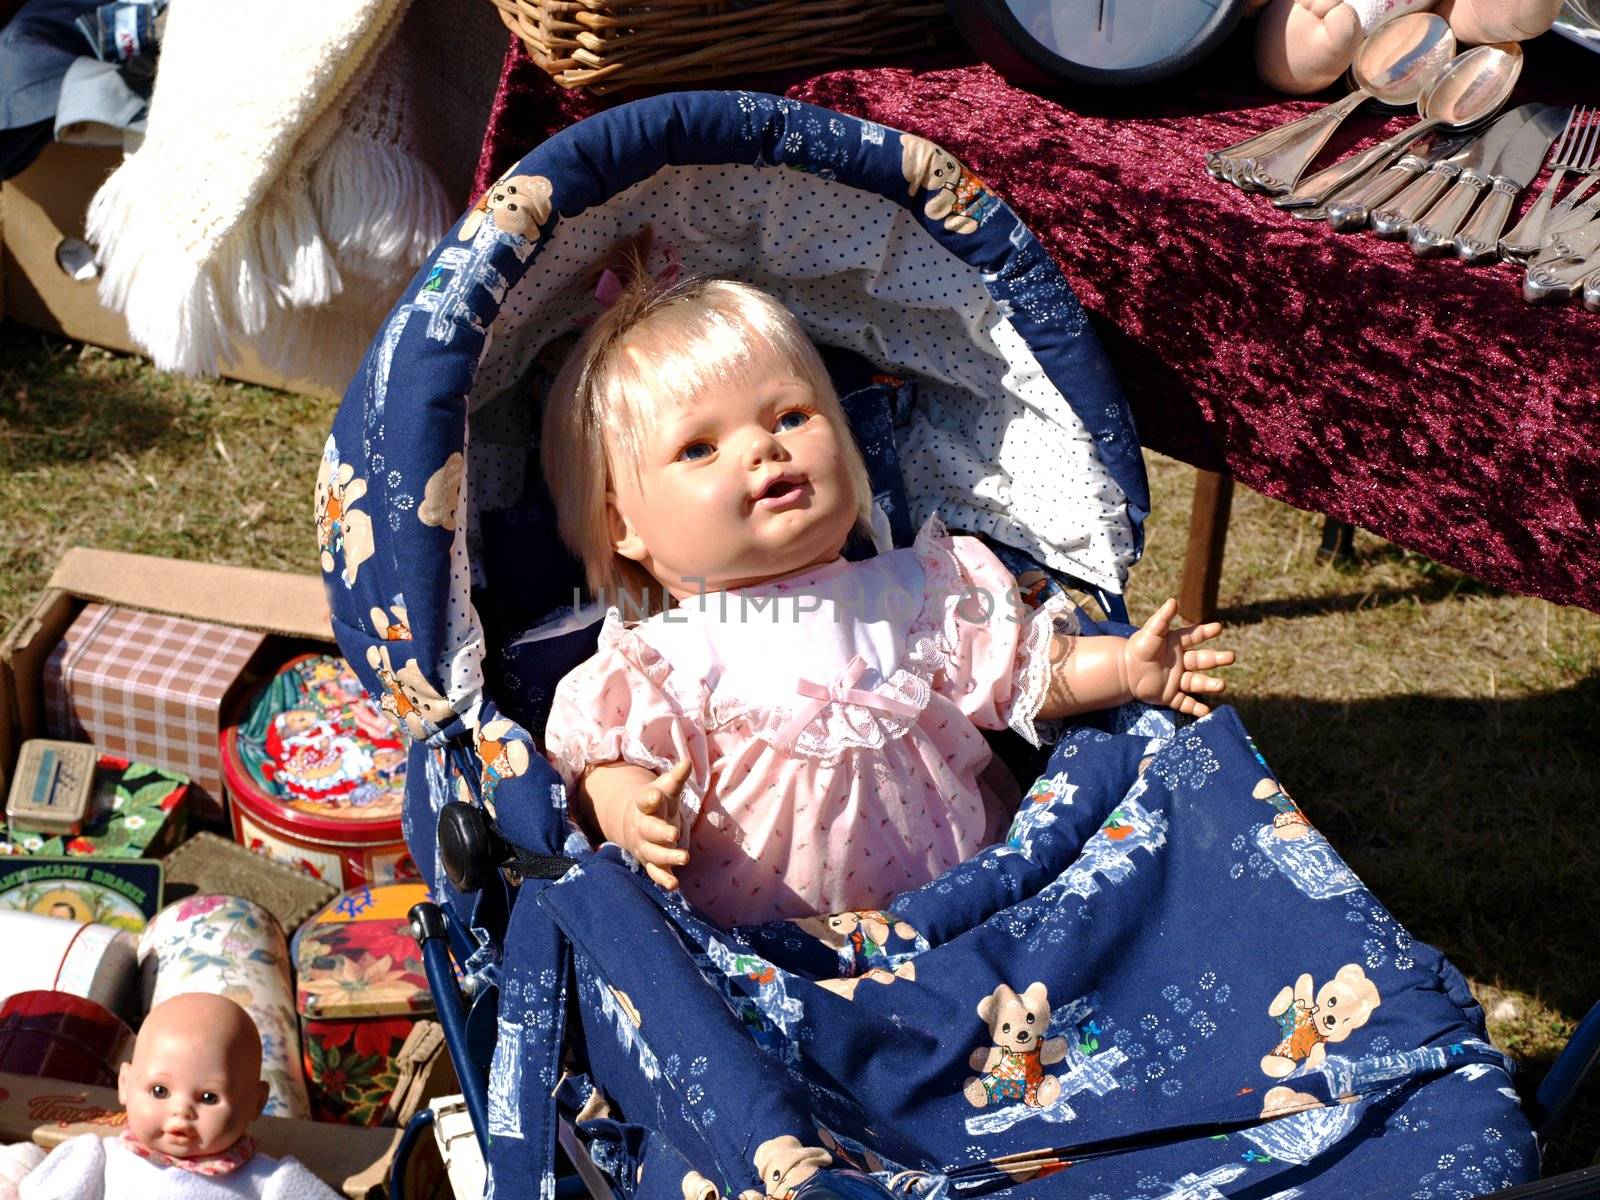 Antique Doll in a flea market on display